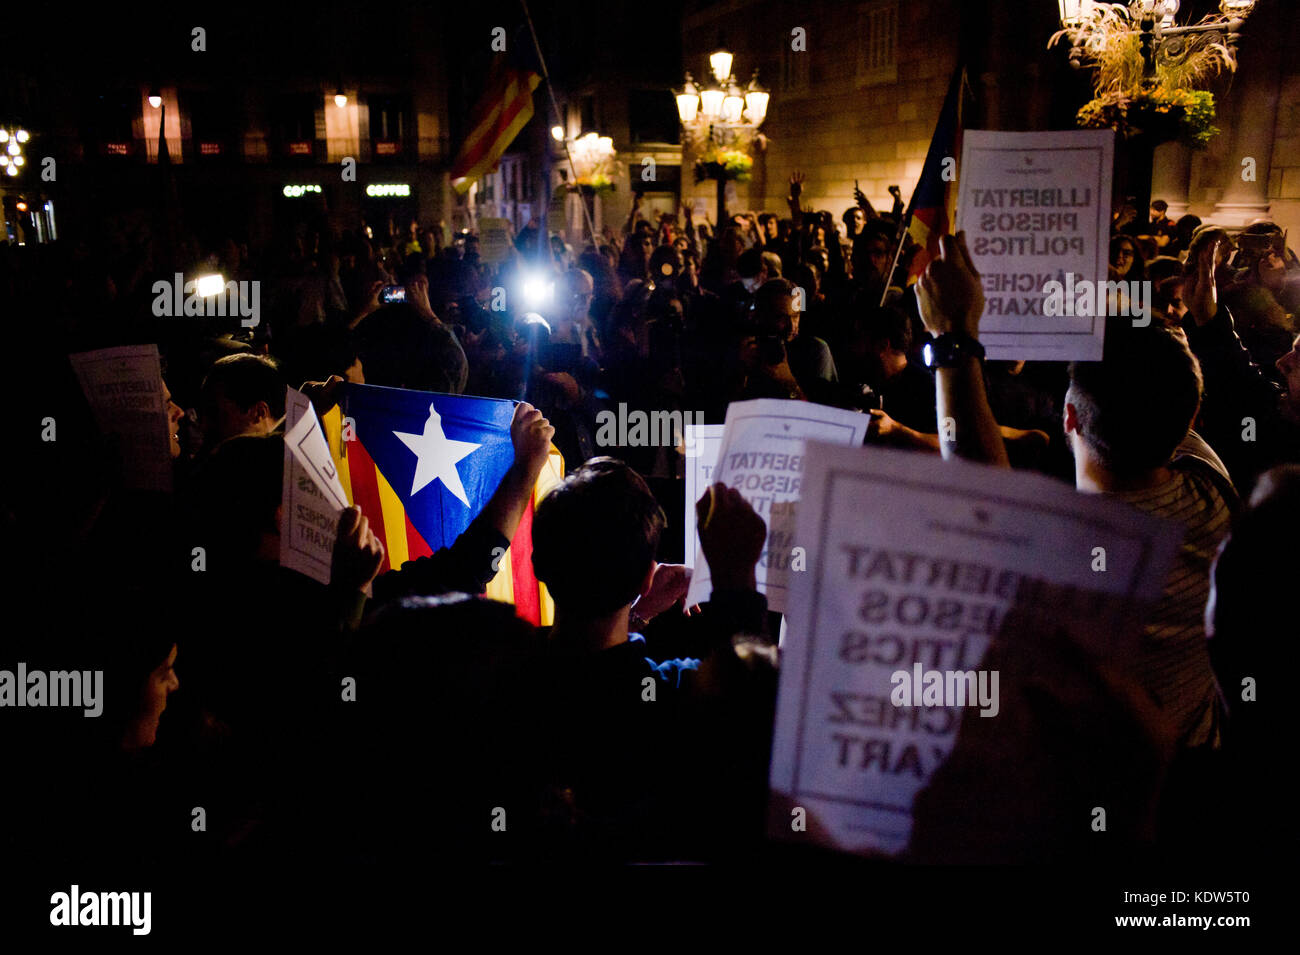 Barcelona, Spain. 16th Oct, 2017. In Barcelona people hold posters reading 'freedom political prisoners Sanchez Cuixart' after Spain's High Court has remanded two leaders of a Catalan separatist organization on suspicion of sedition. The leader of the Catalan National Assembly (ANC), Jordi Sanchez, and Jordi Cuixart of the Omnium Cultural group were jailed on Monday after questioning. Credit: Jordi Boixareu/Alamy Live News Stock Photo